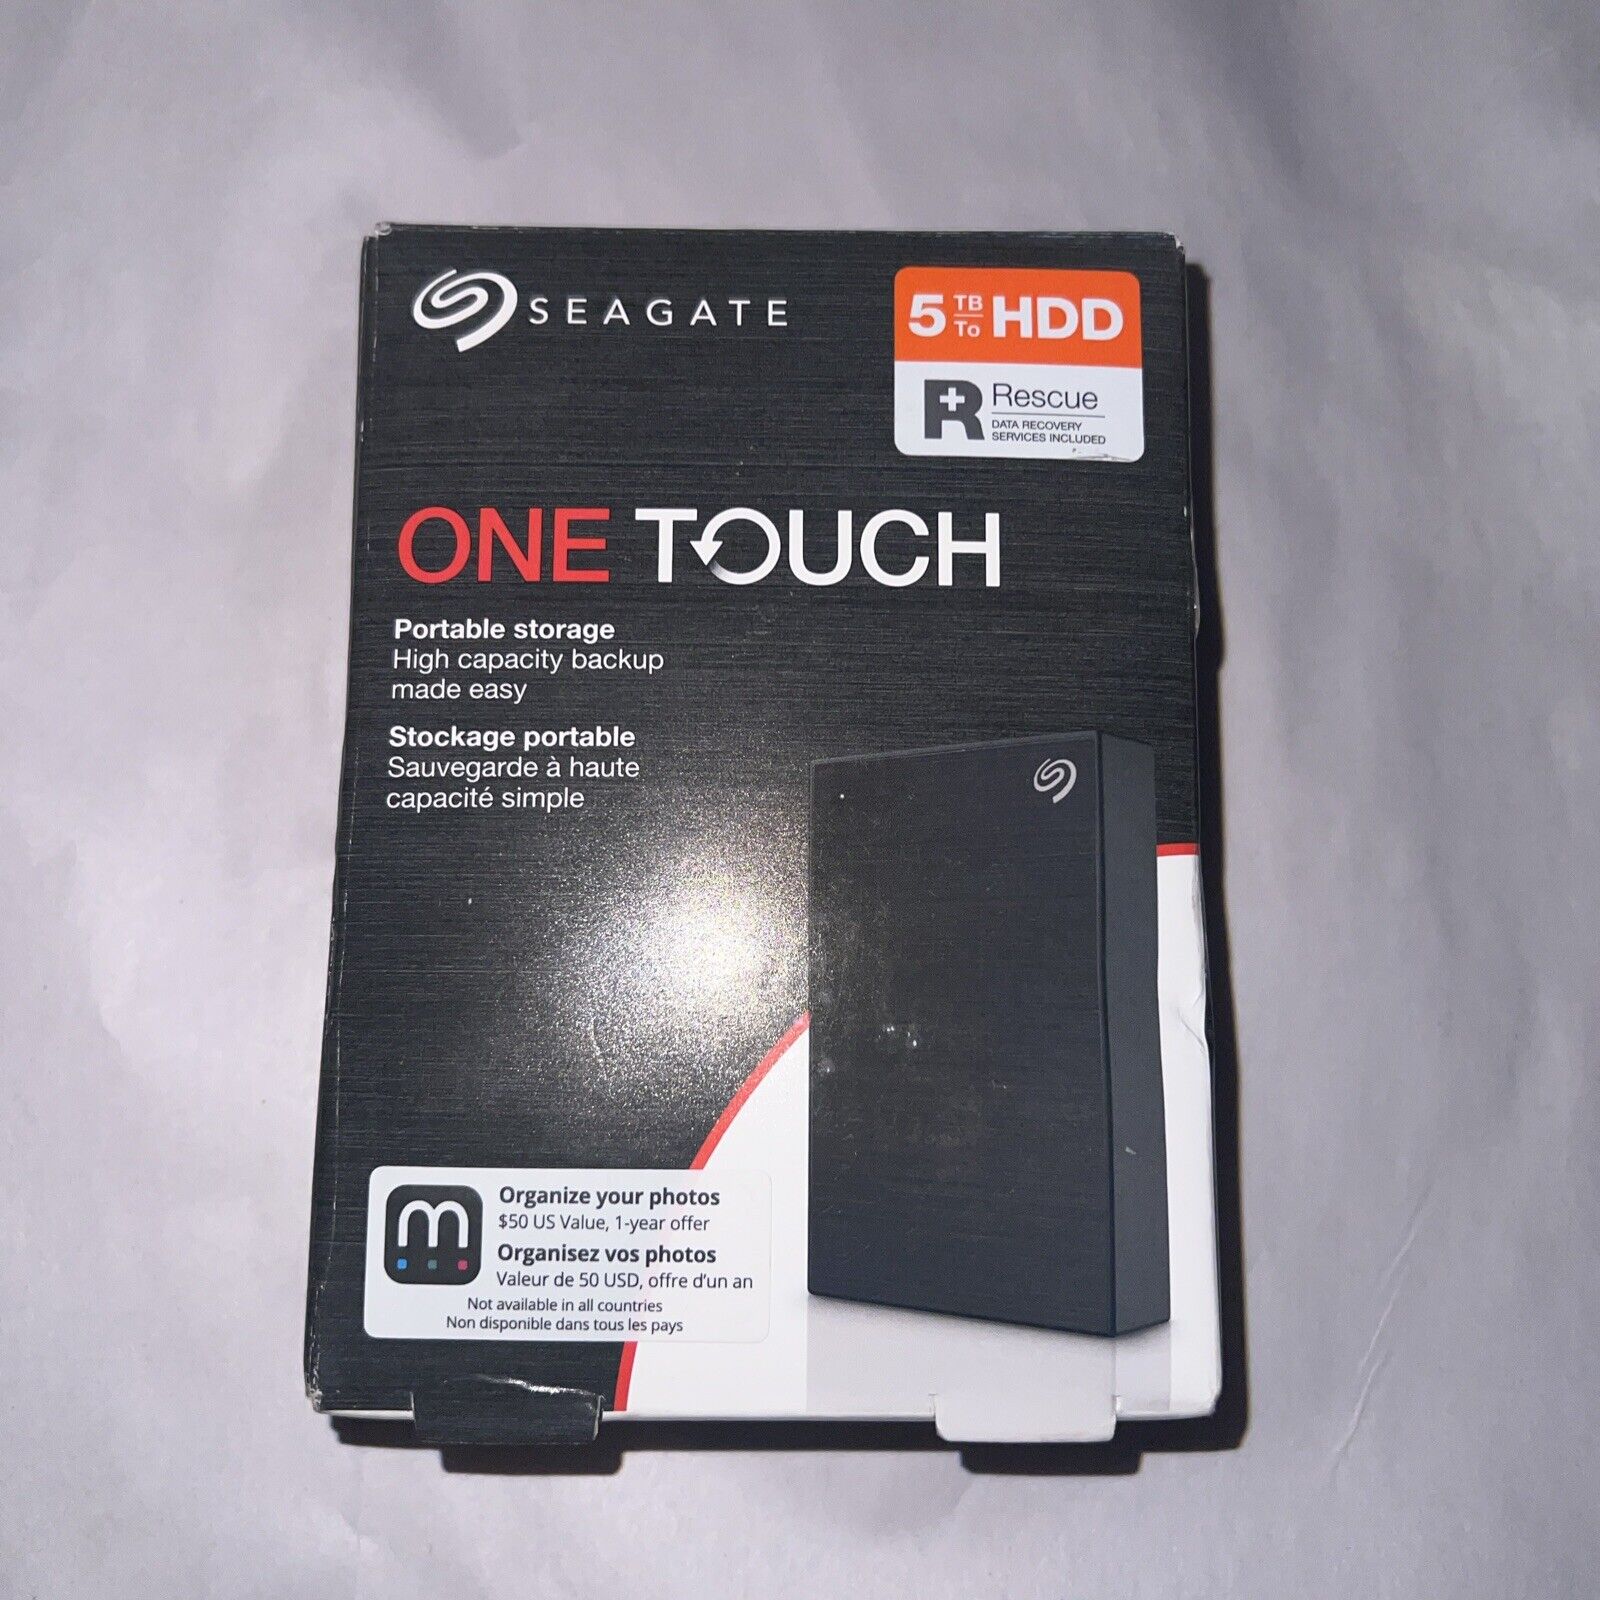 Seagate One Touch 5TB USB External Hard Drive 5 TB rescue HDD -STKC5000400